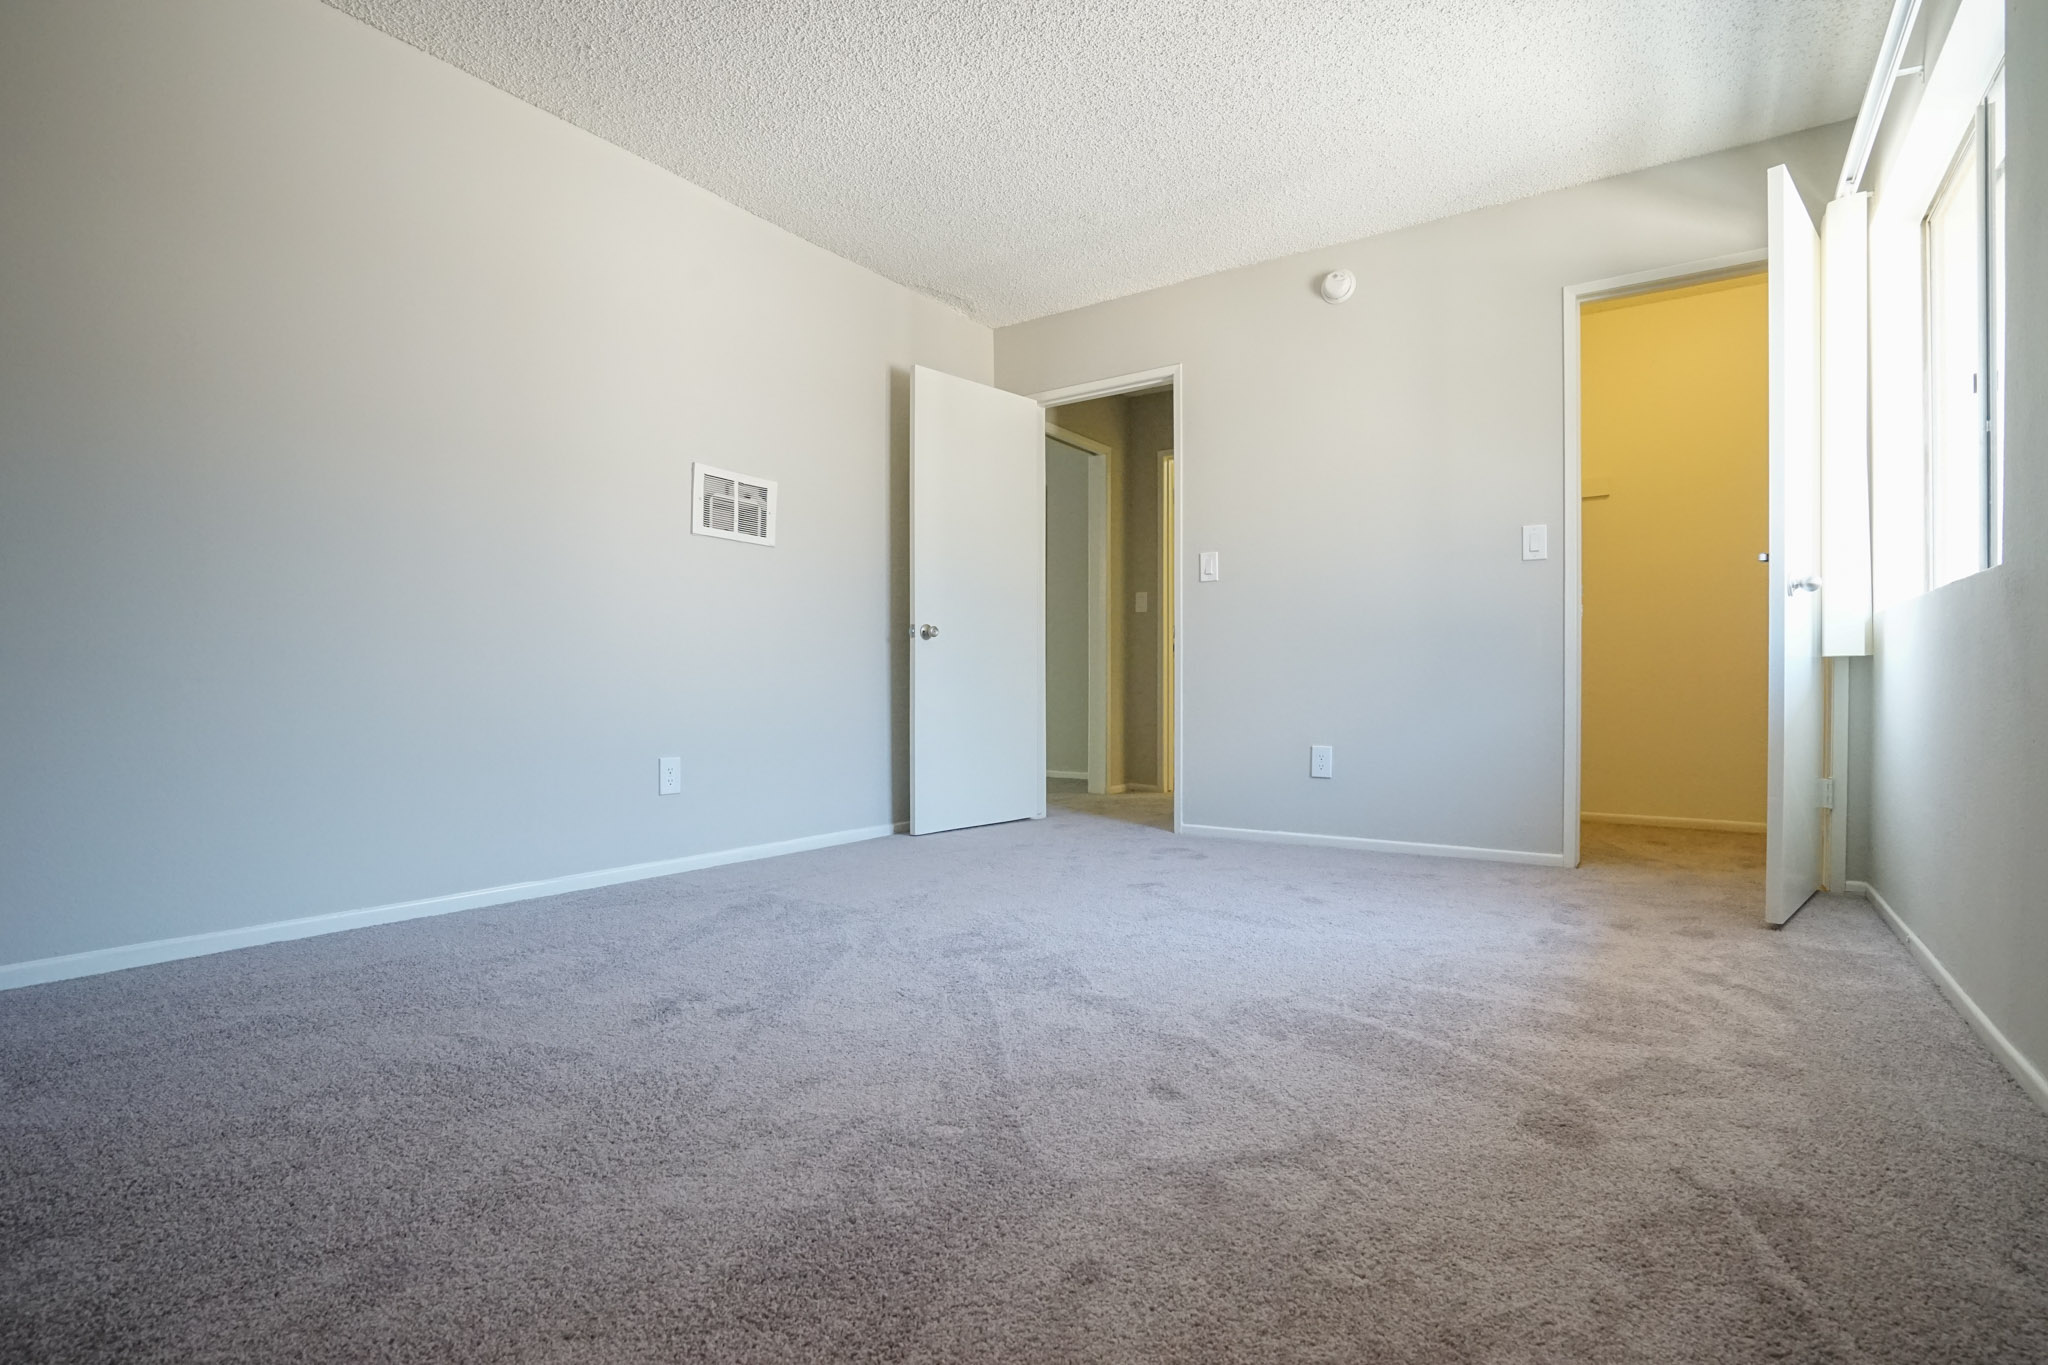 View of a bedroom with carpeted floors. Room has a window with blinds and a closet with a door.